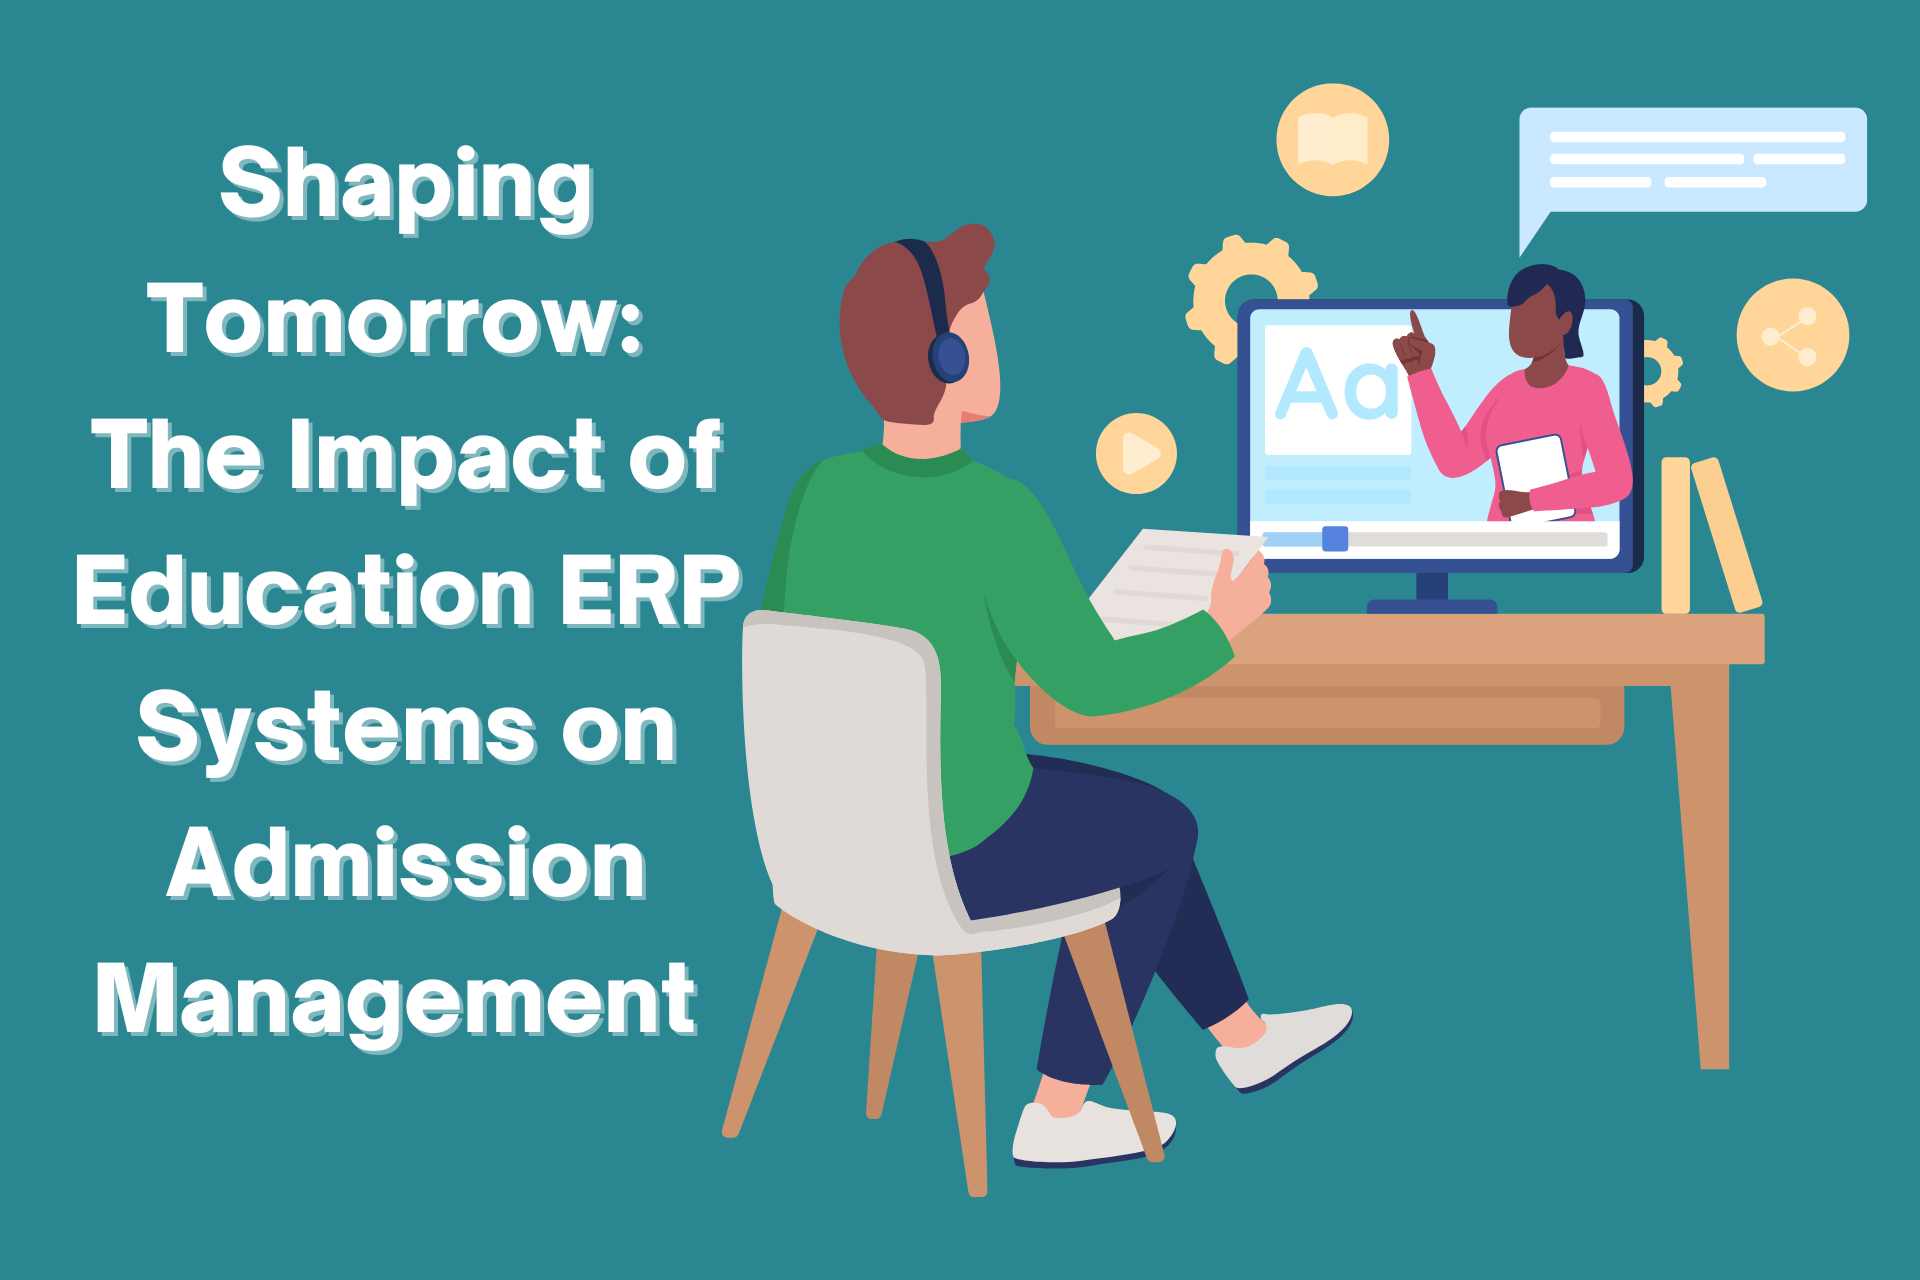 Shaping Tomorrow The Impact of Education ERP Systems on Admission Management